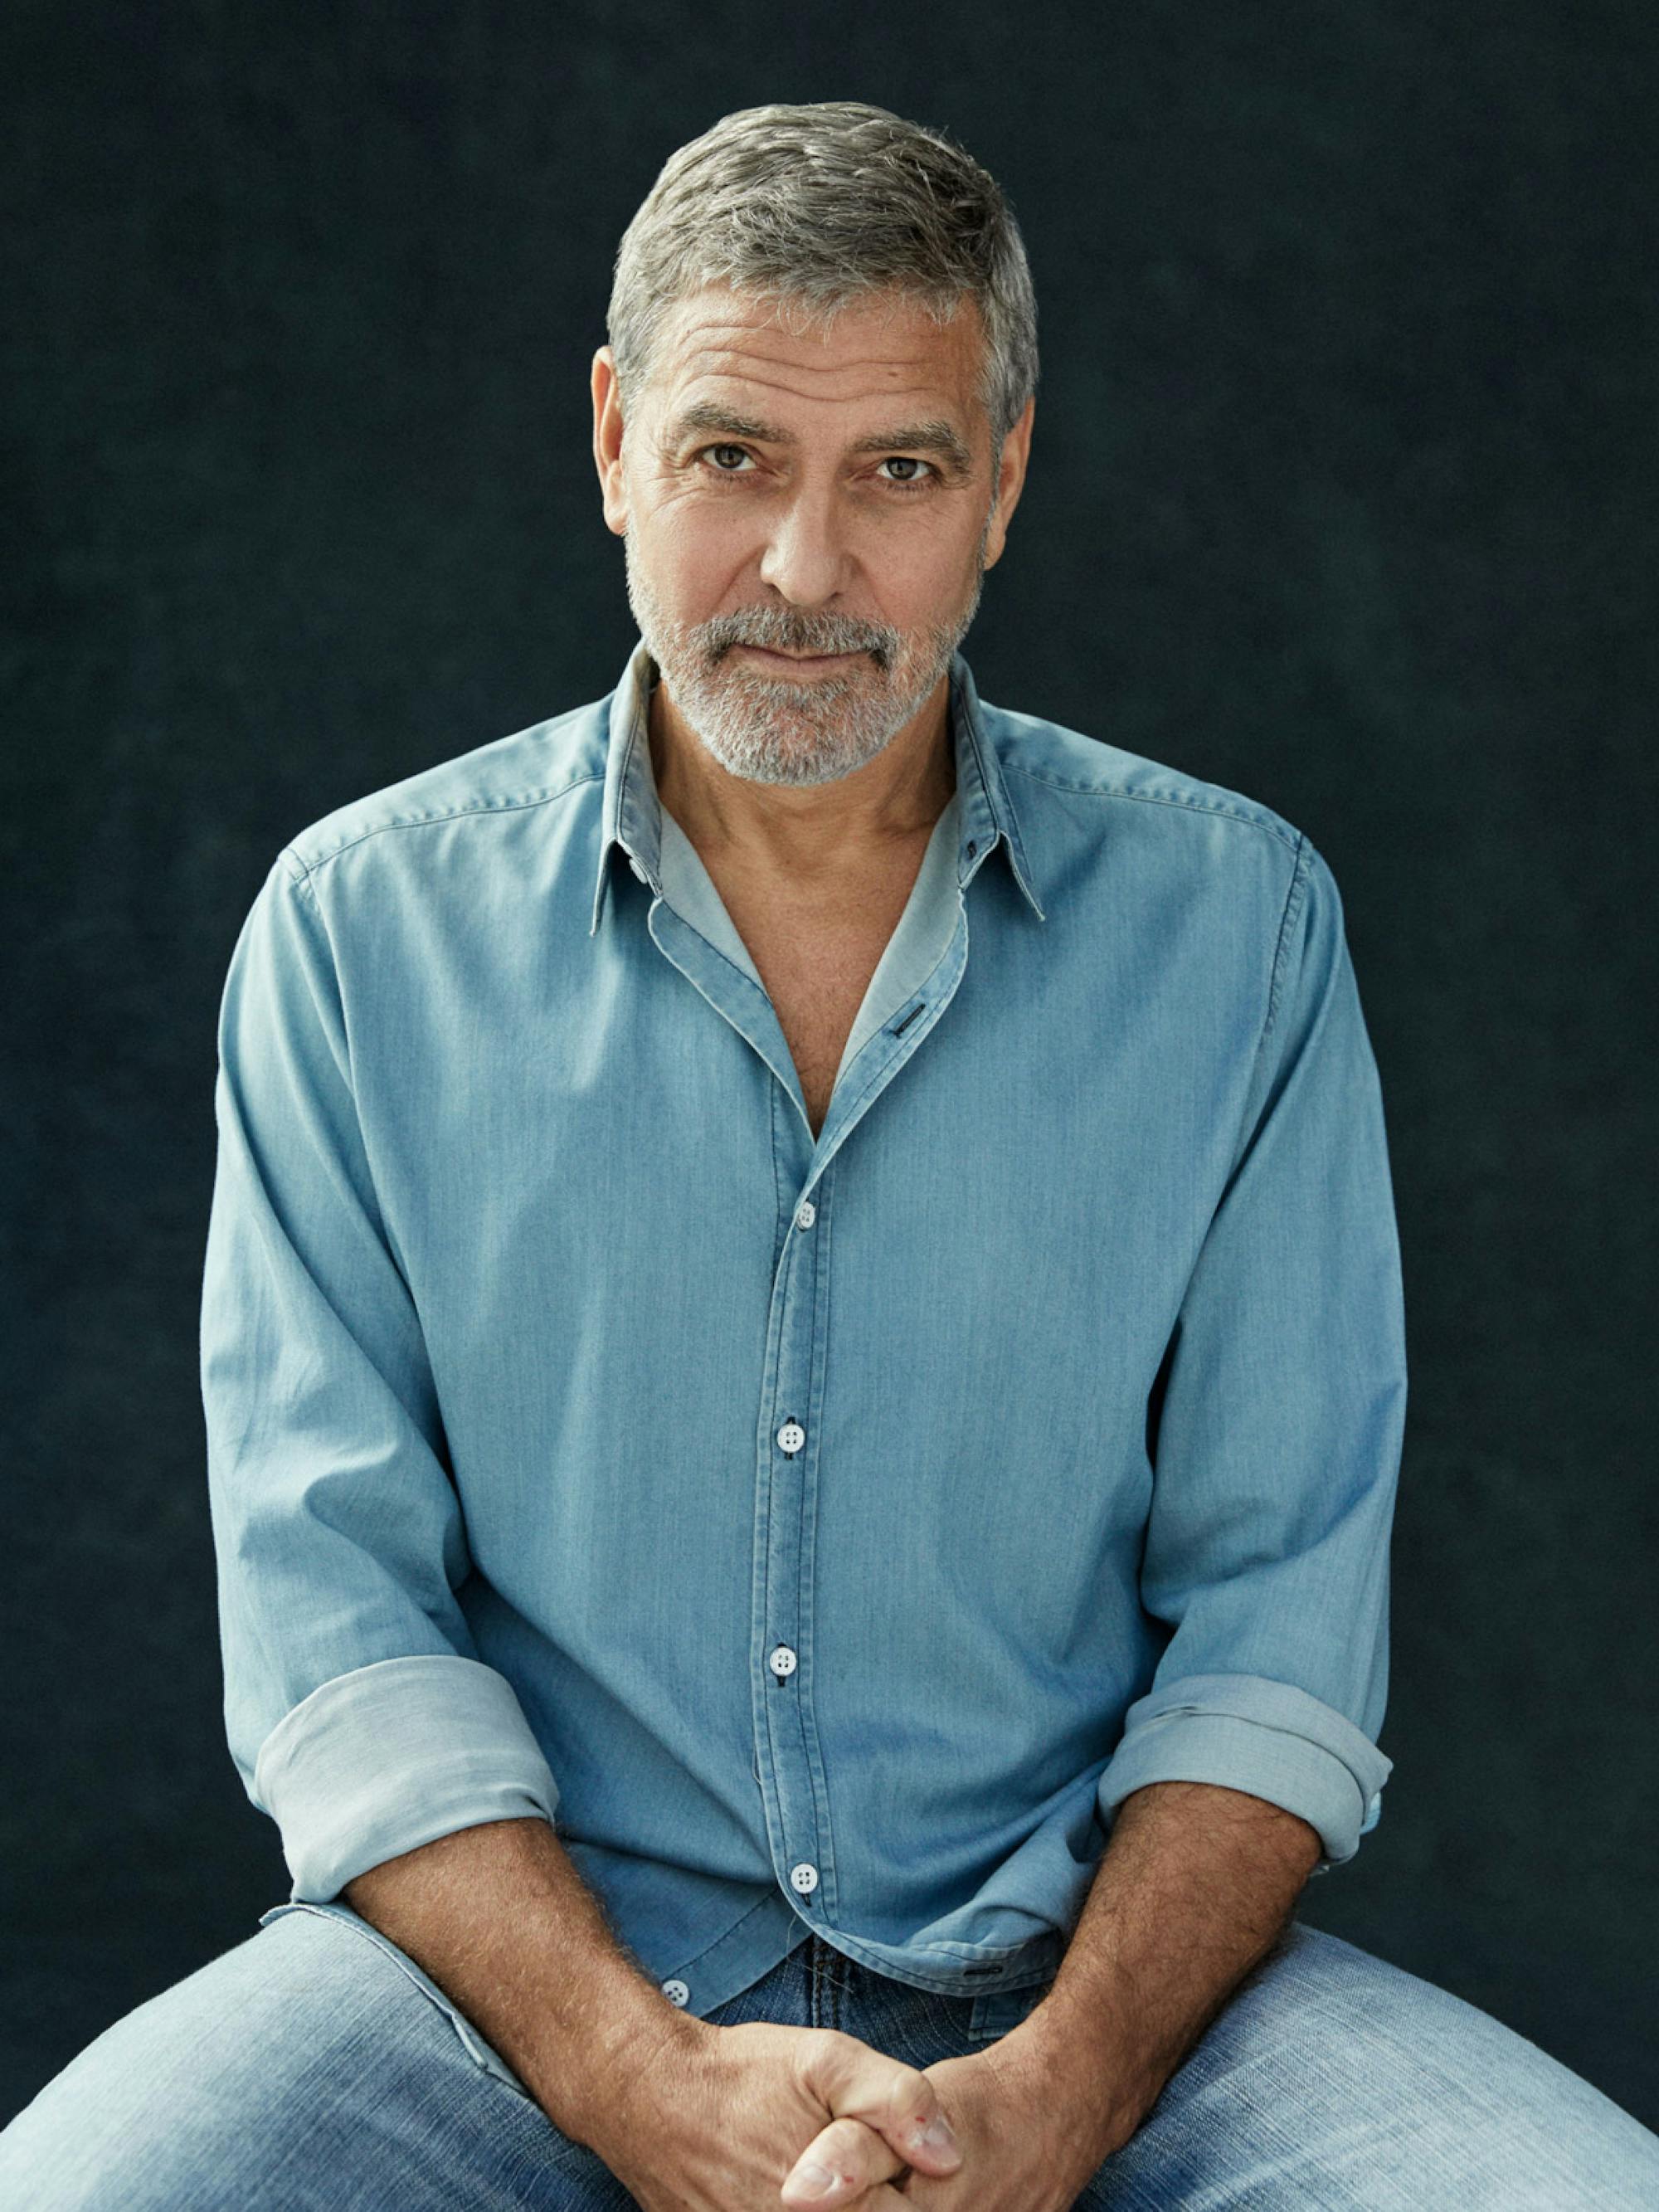 George Clooney in light-blue denim against a black background. With one look, he bores a hole right through the camera.